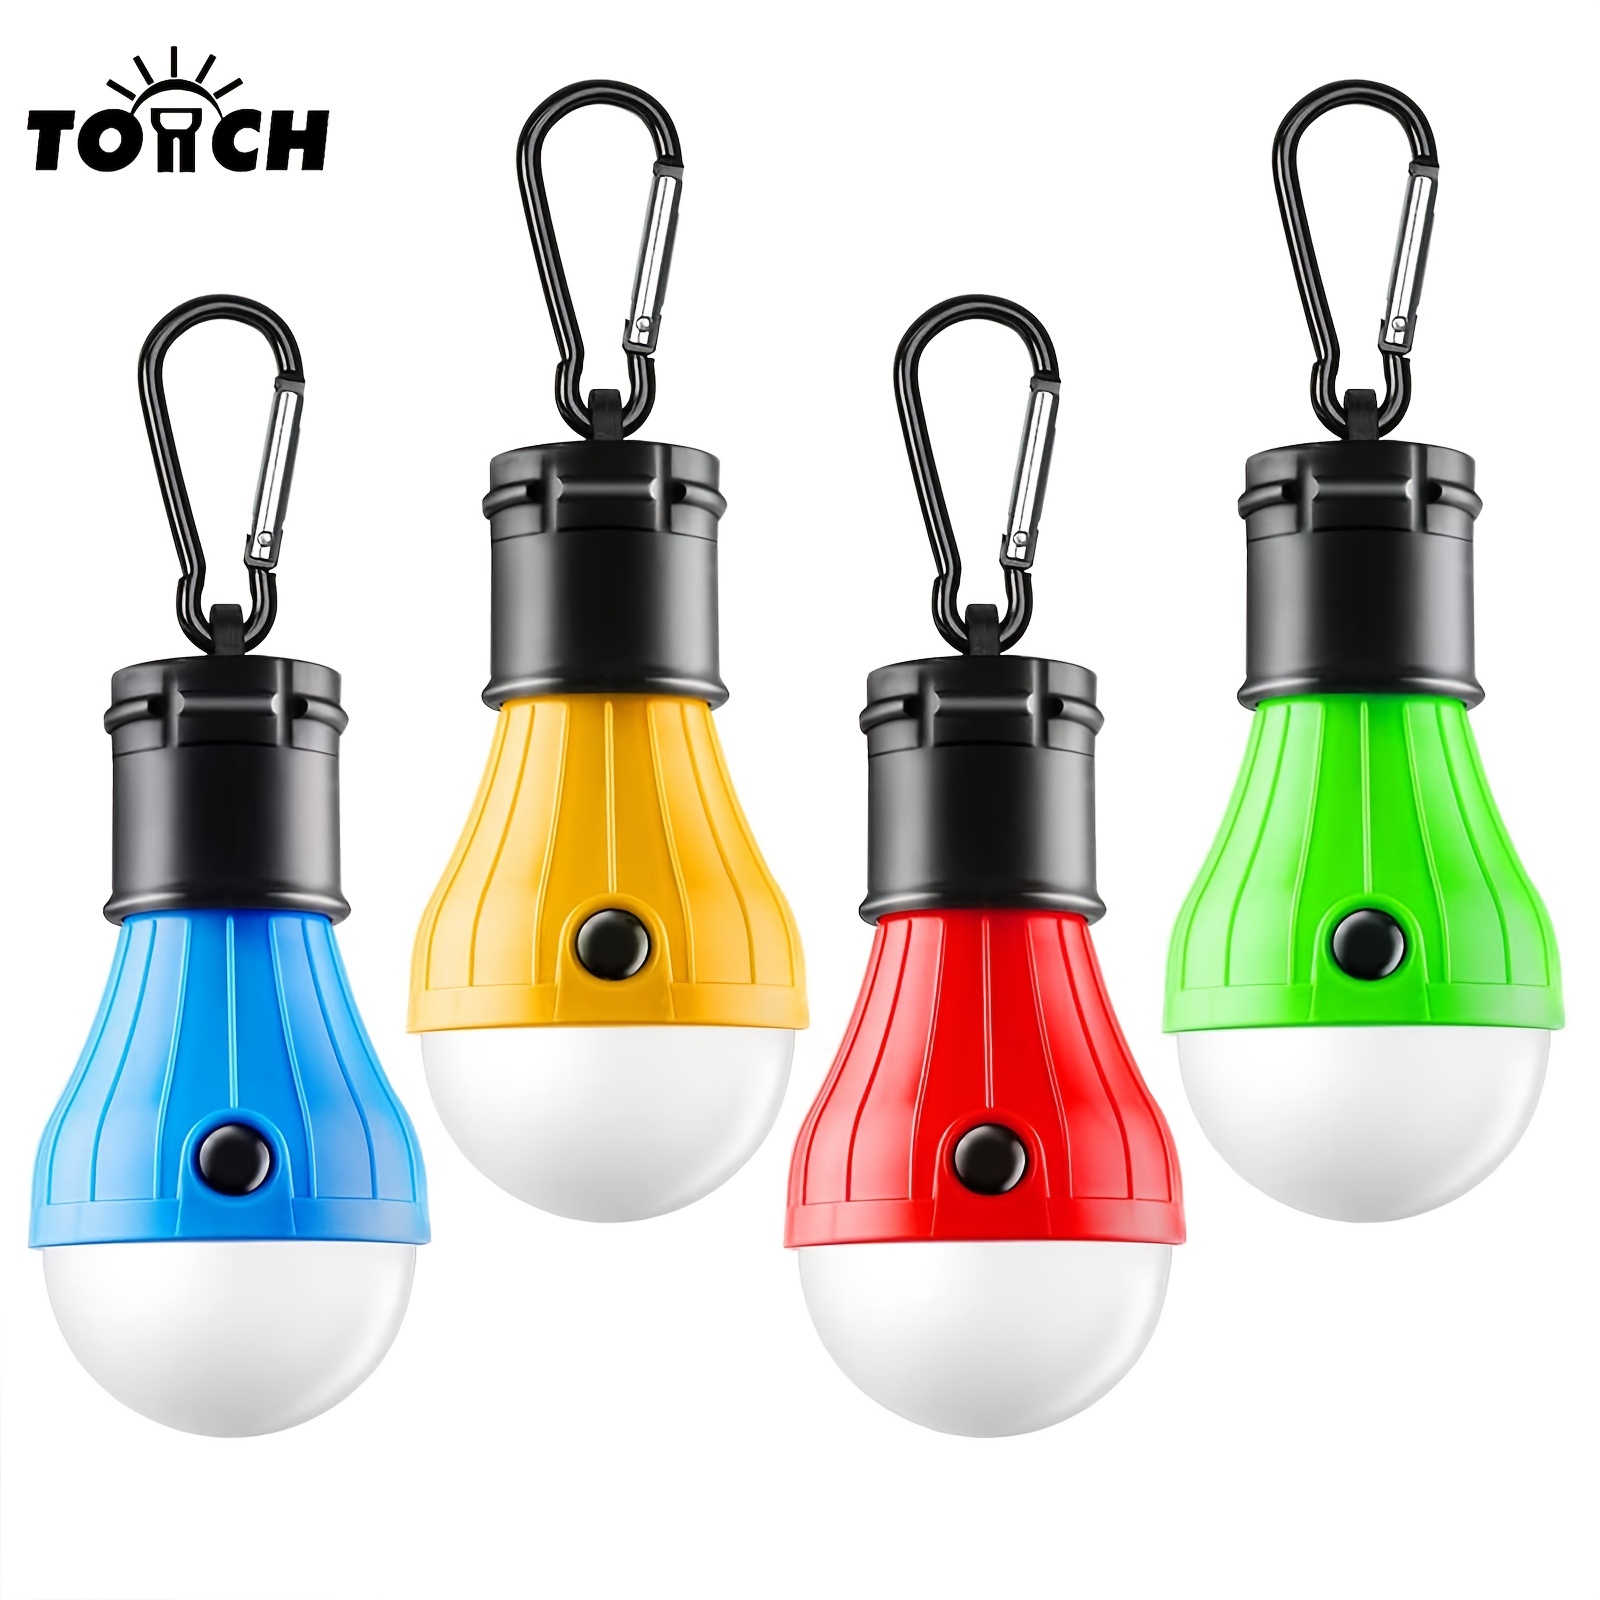 Doukey LED Camping Light [4 Pack] Portable LED Tent Lantern with Carabiner for Backpacking Camping Hiking Fishing Emergency Light Battery Powered Lamp